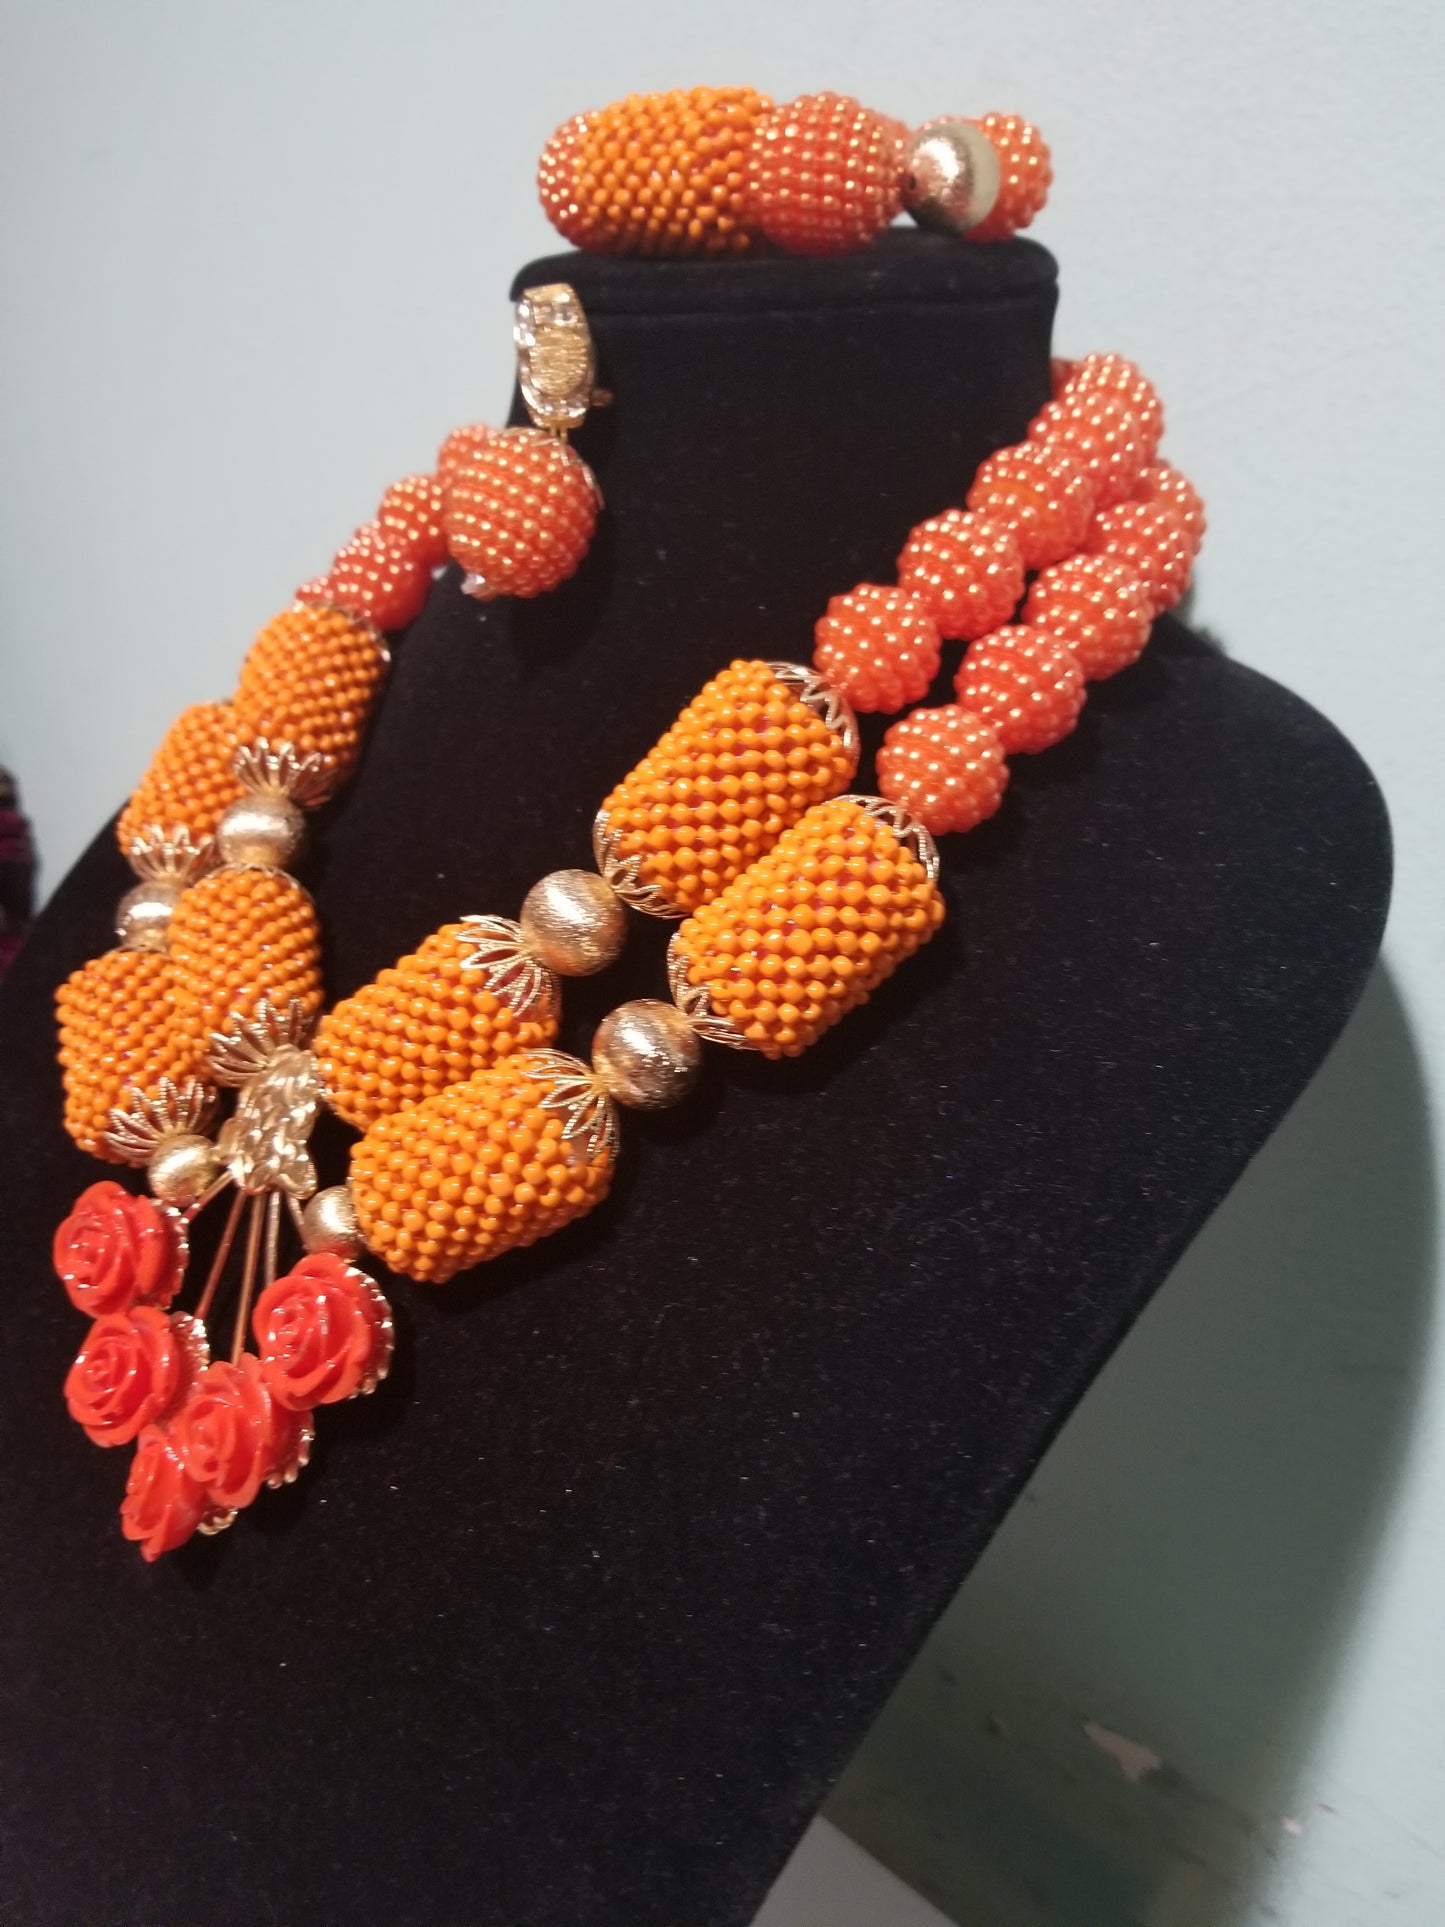 Clearance: back in stock orange beaded coral-necklace set in 2 rows. Orange pendant for a beautiful look. Sold as a set